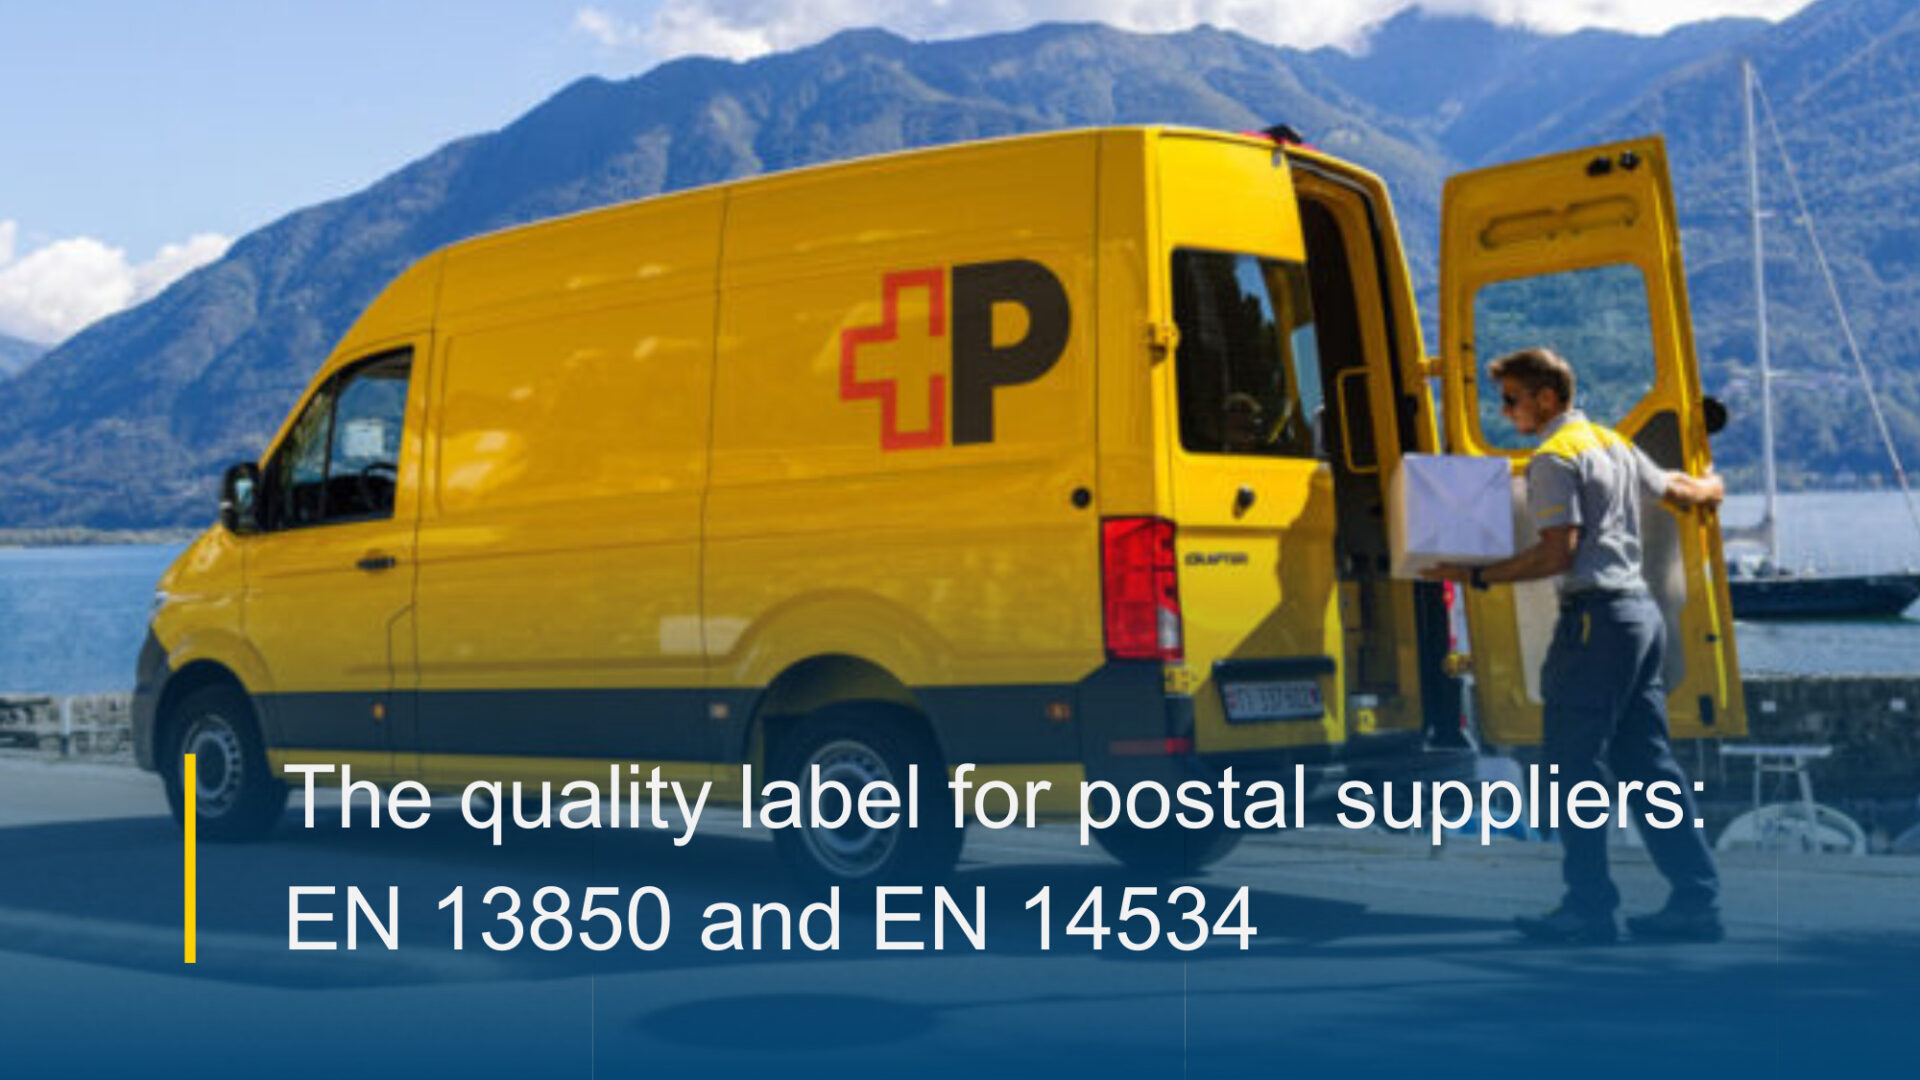 The quality label for postal suppliers: EN 13850 and EN 14534